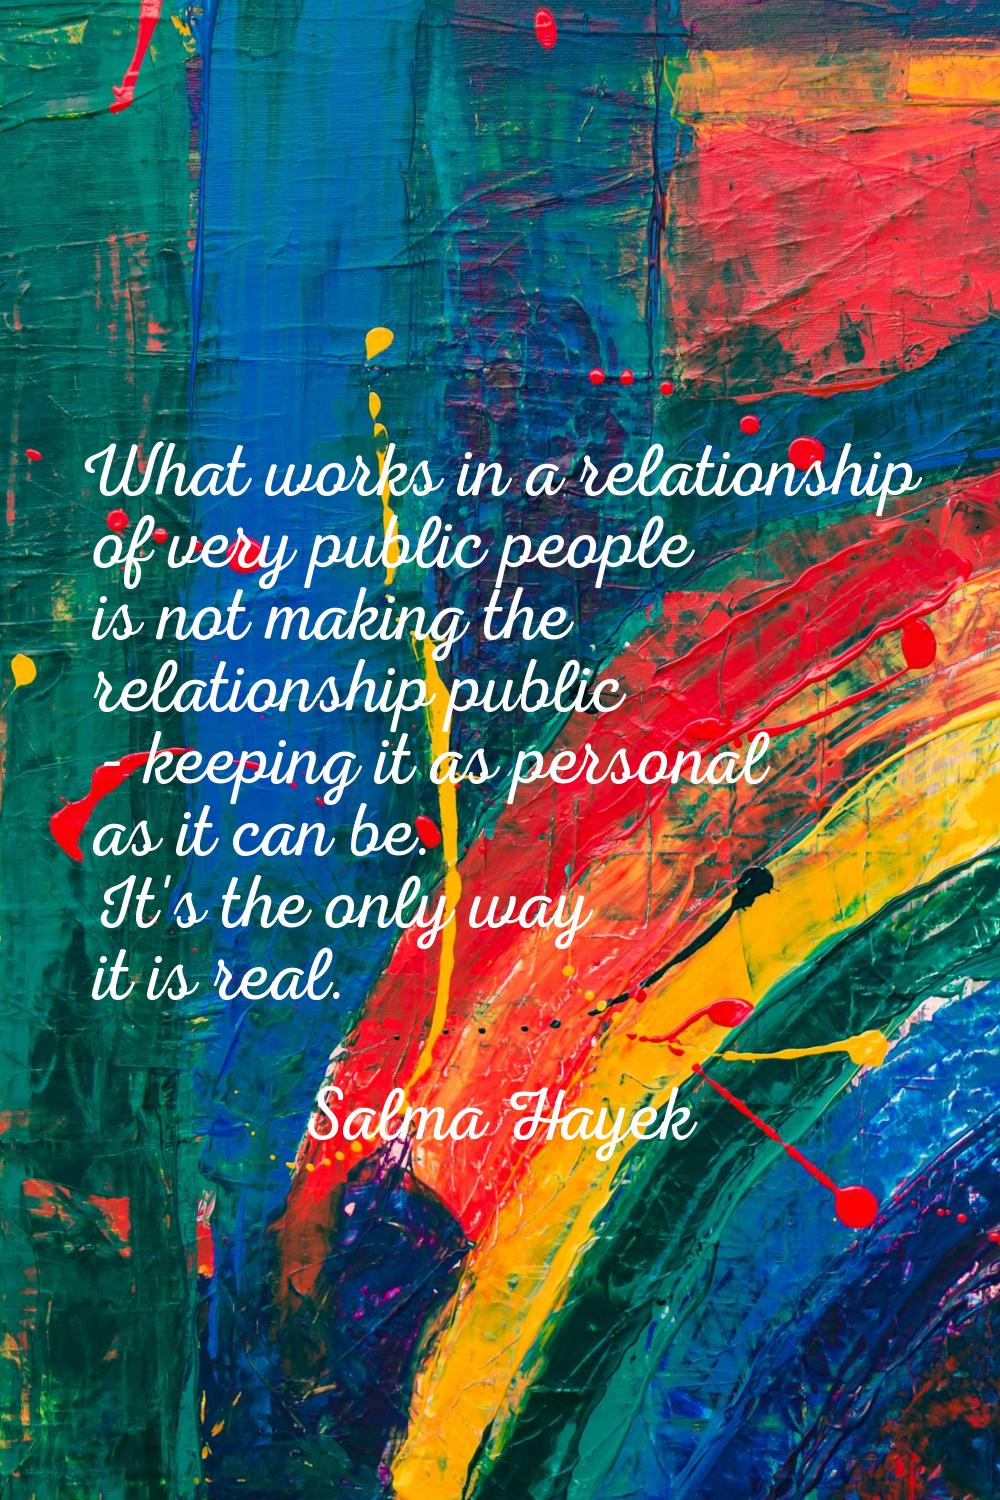 What works in a relationship of very public people is not making the relationship public - keeping 